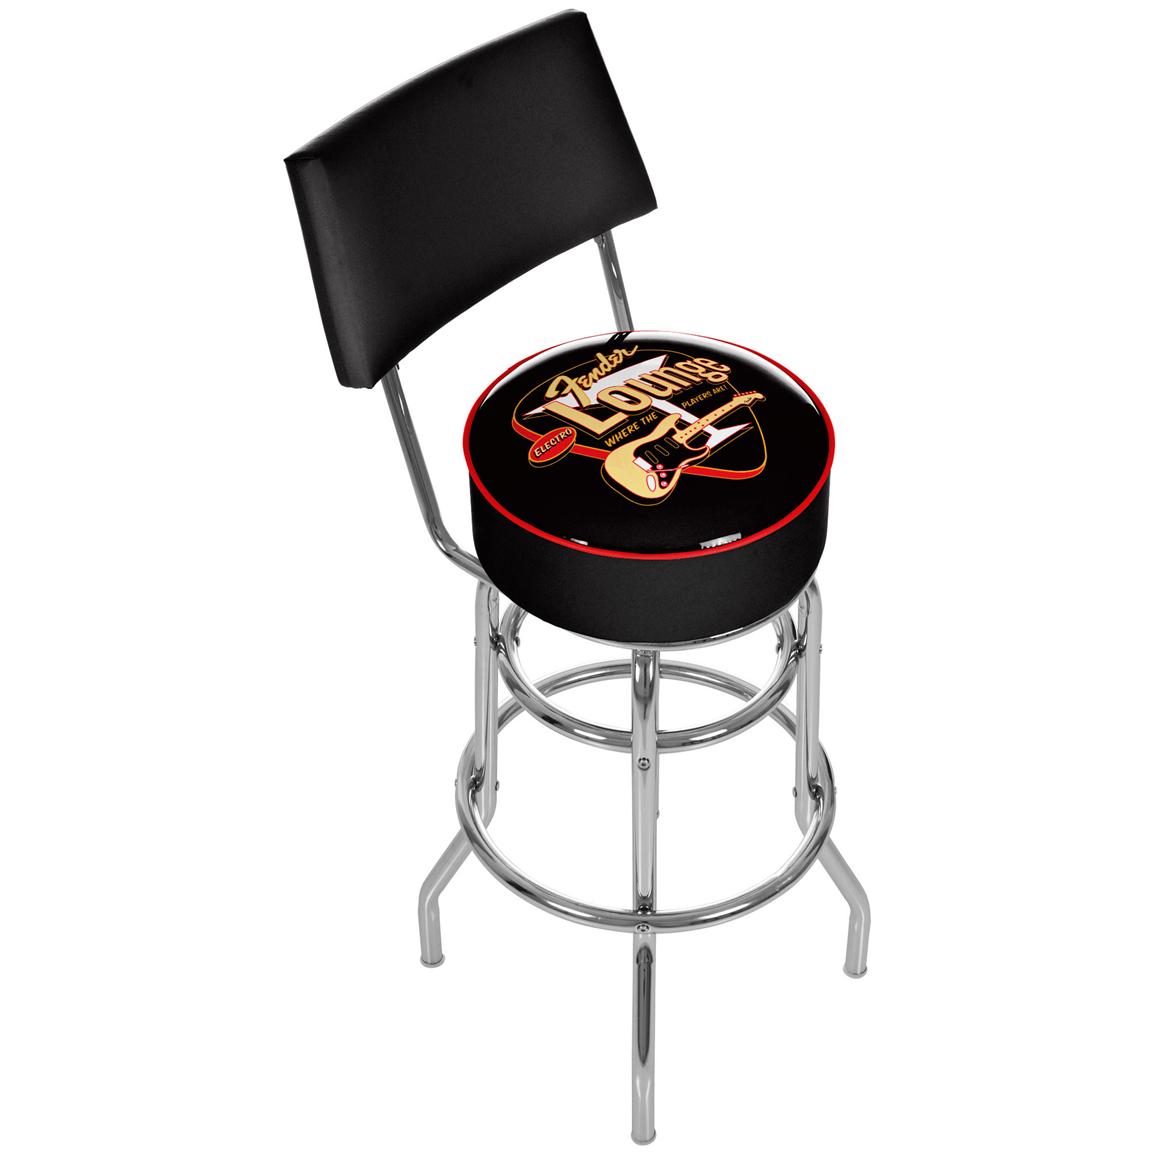 Fender® Padded Bar Stool with Backrest - 300063, at Sportsman's Guide1154 x 1154